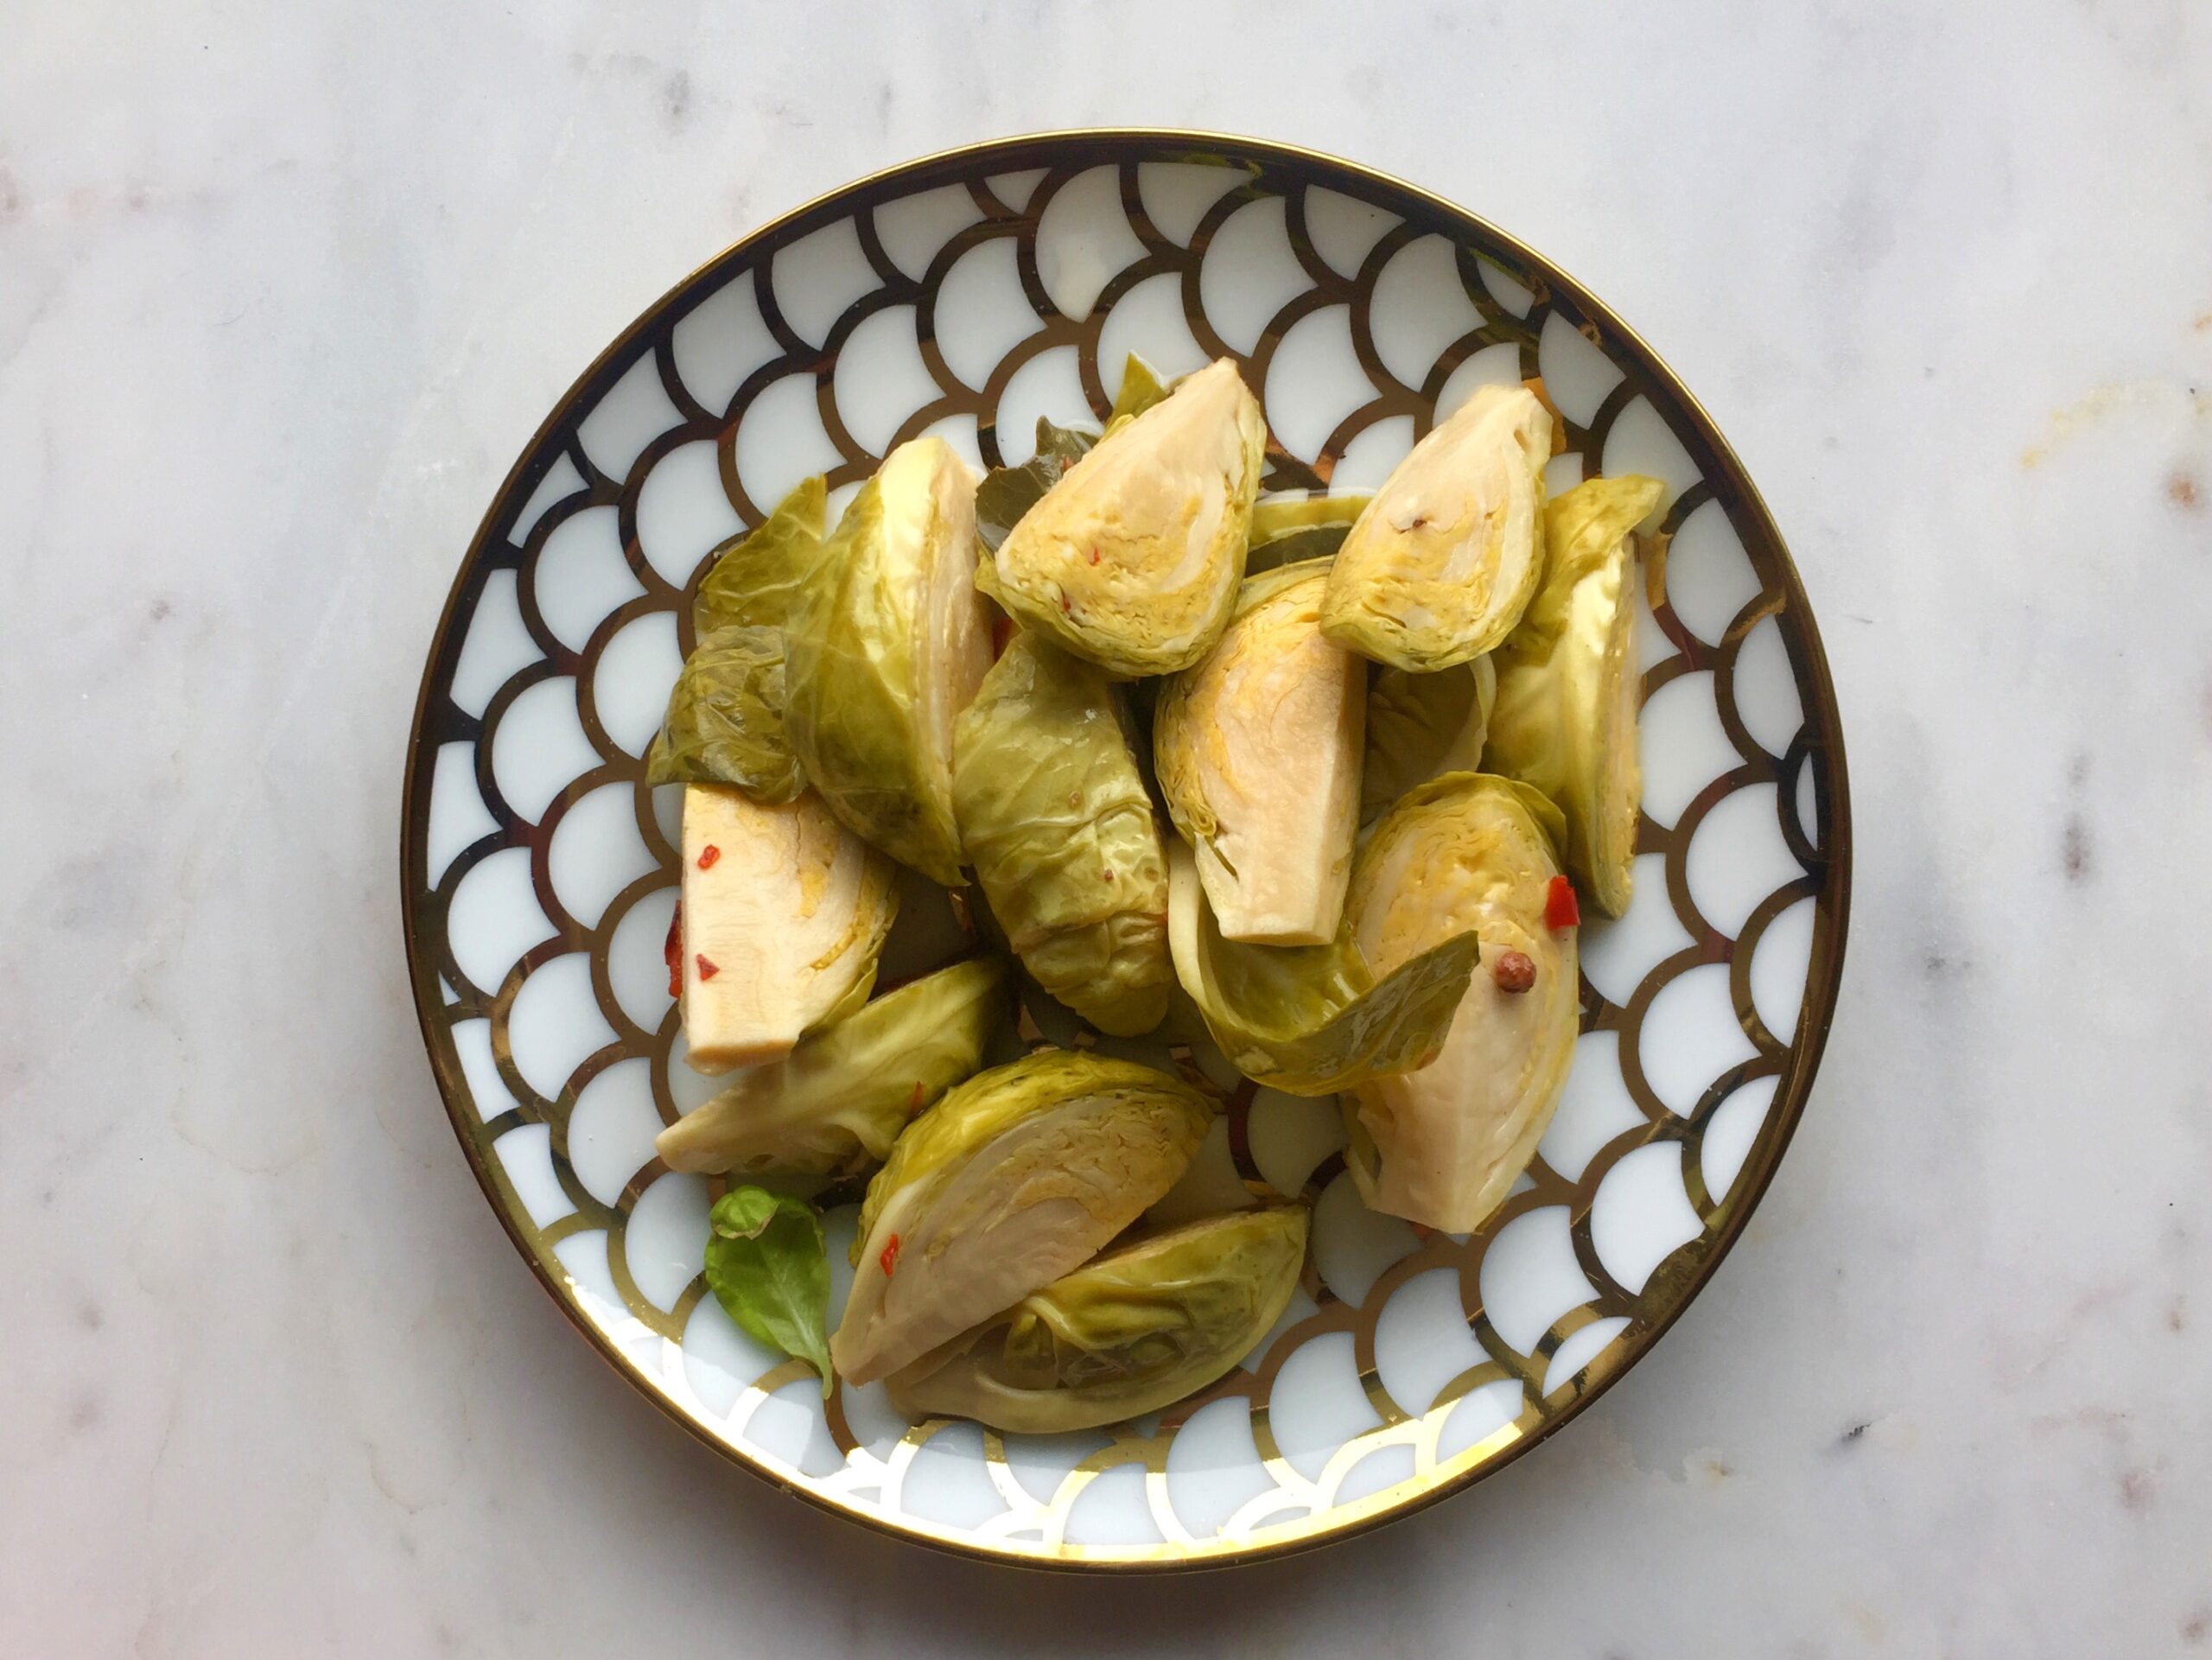 Pickled brussel sprouts